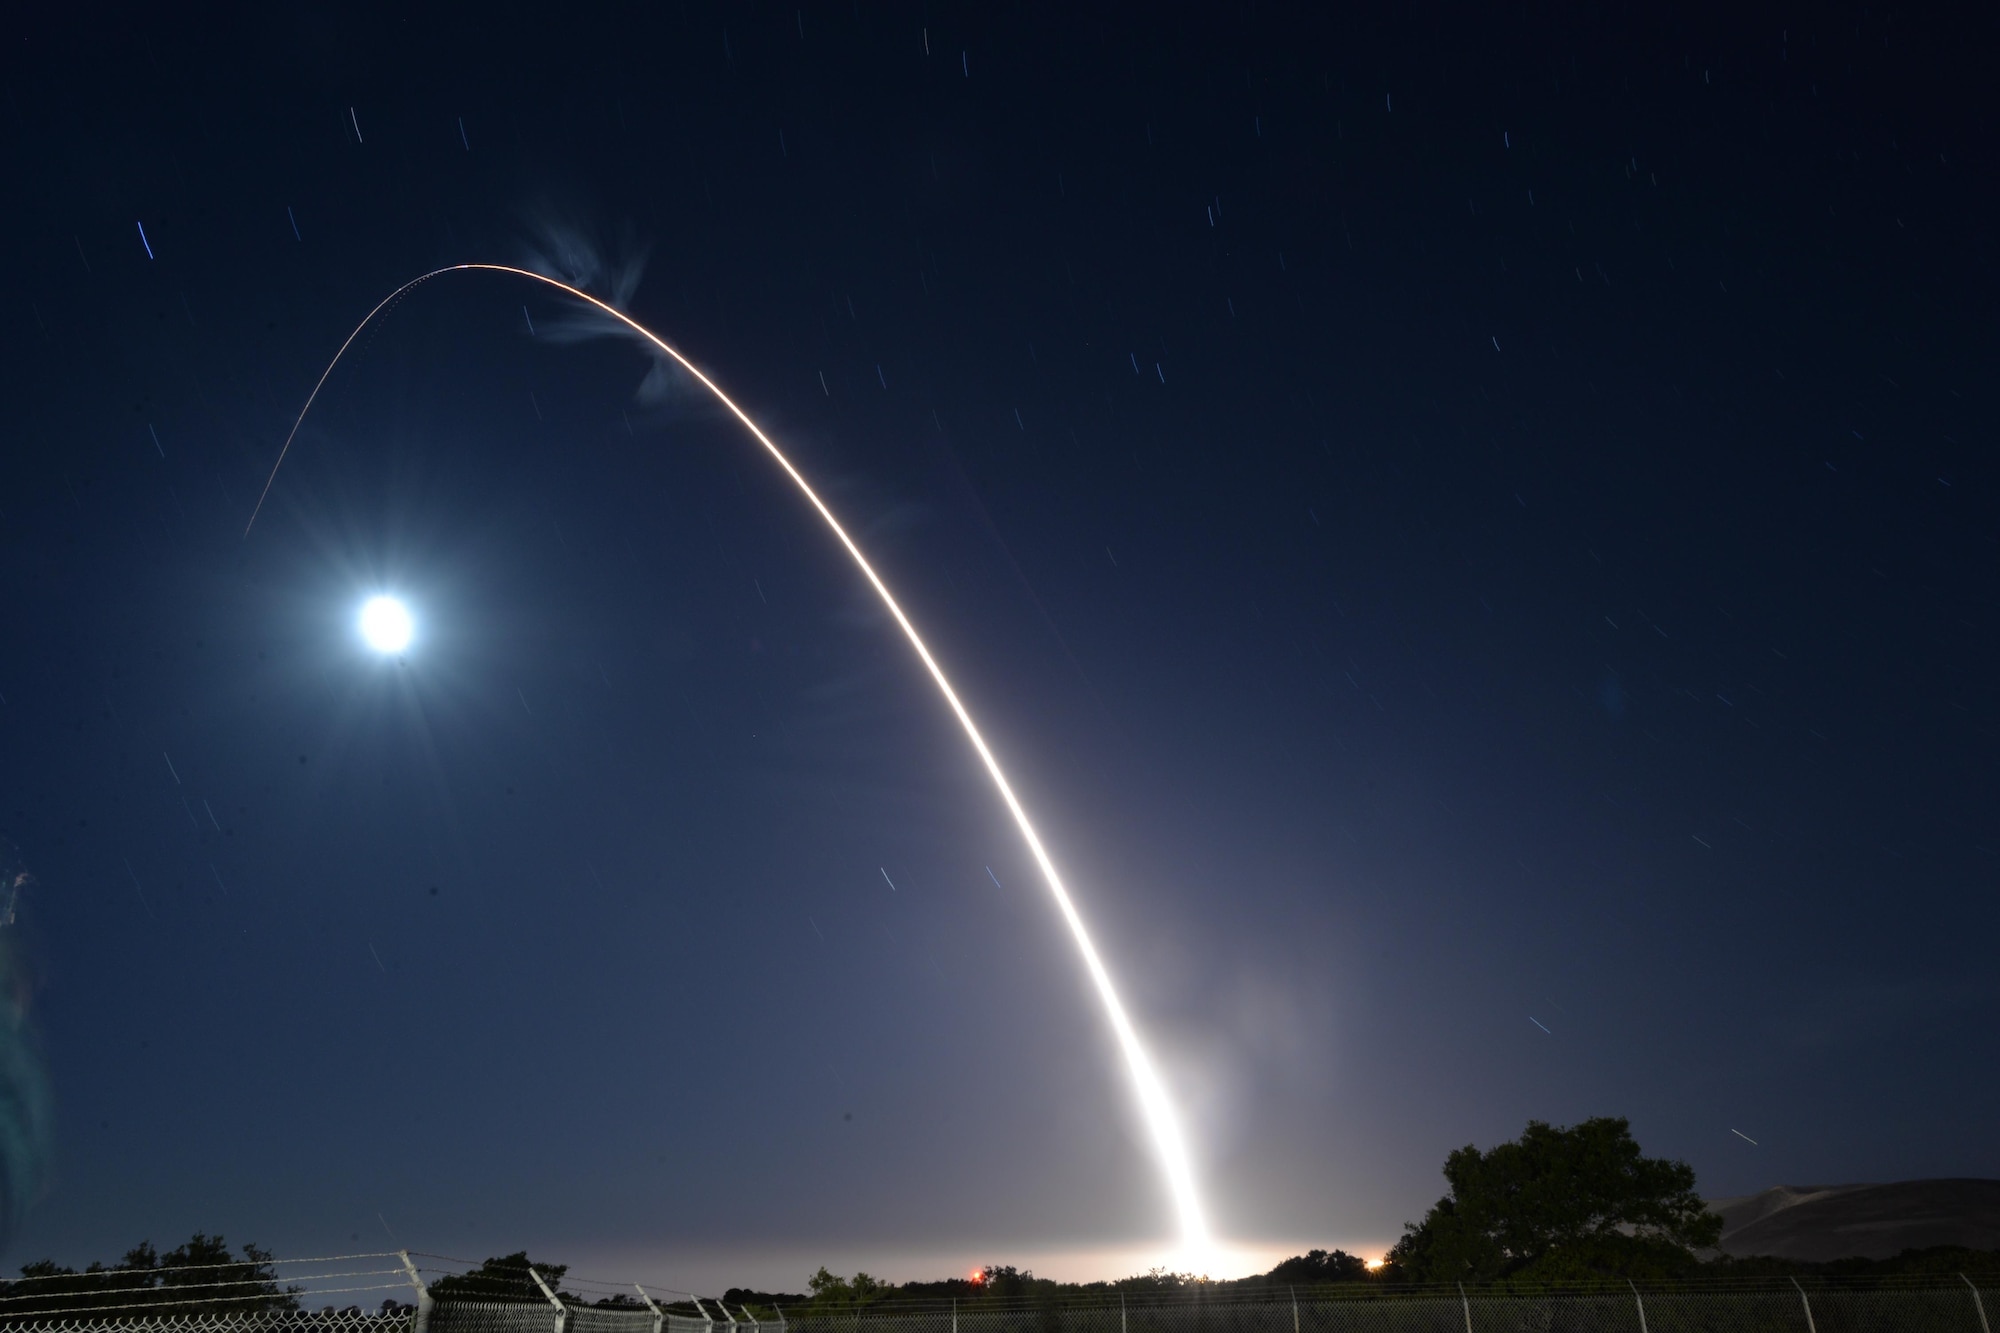 An unarmed U.S. Air Force Minuteman III intercontinental ballistic missile launches during an operational test May 3, 2017, at Vandenberg Air Force Base, Calif. A team of Air Force Global Strike Command Airmen assigned to the 341st Missile Wing at Malmstrom Air Force Base, Mont., launched the Minuteman III ICBM equipped with a single test reentry vehicle. (U.S. Air Force photo by Airman 1st Class Daniel Brosam)